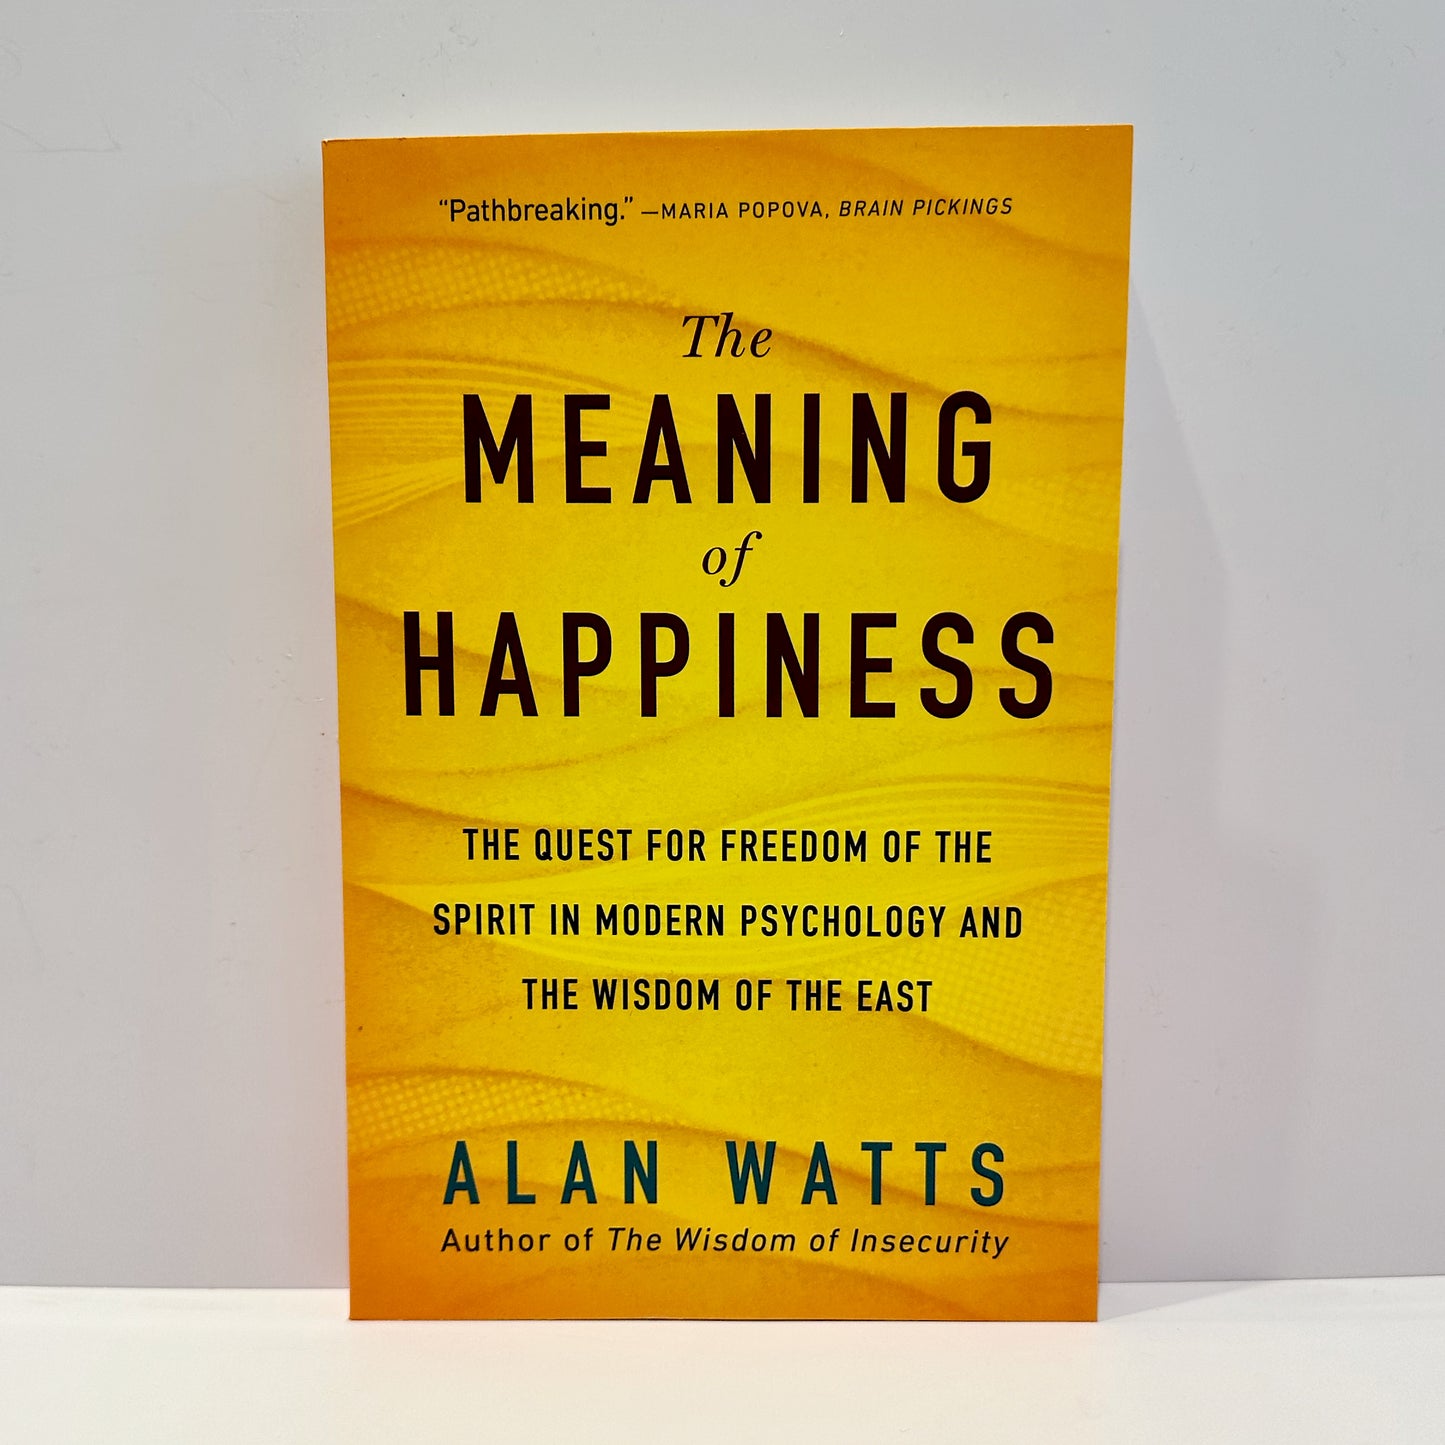 The Meaning of Happiness - Alan Watts